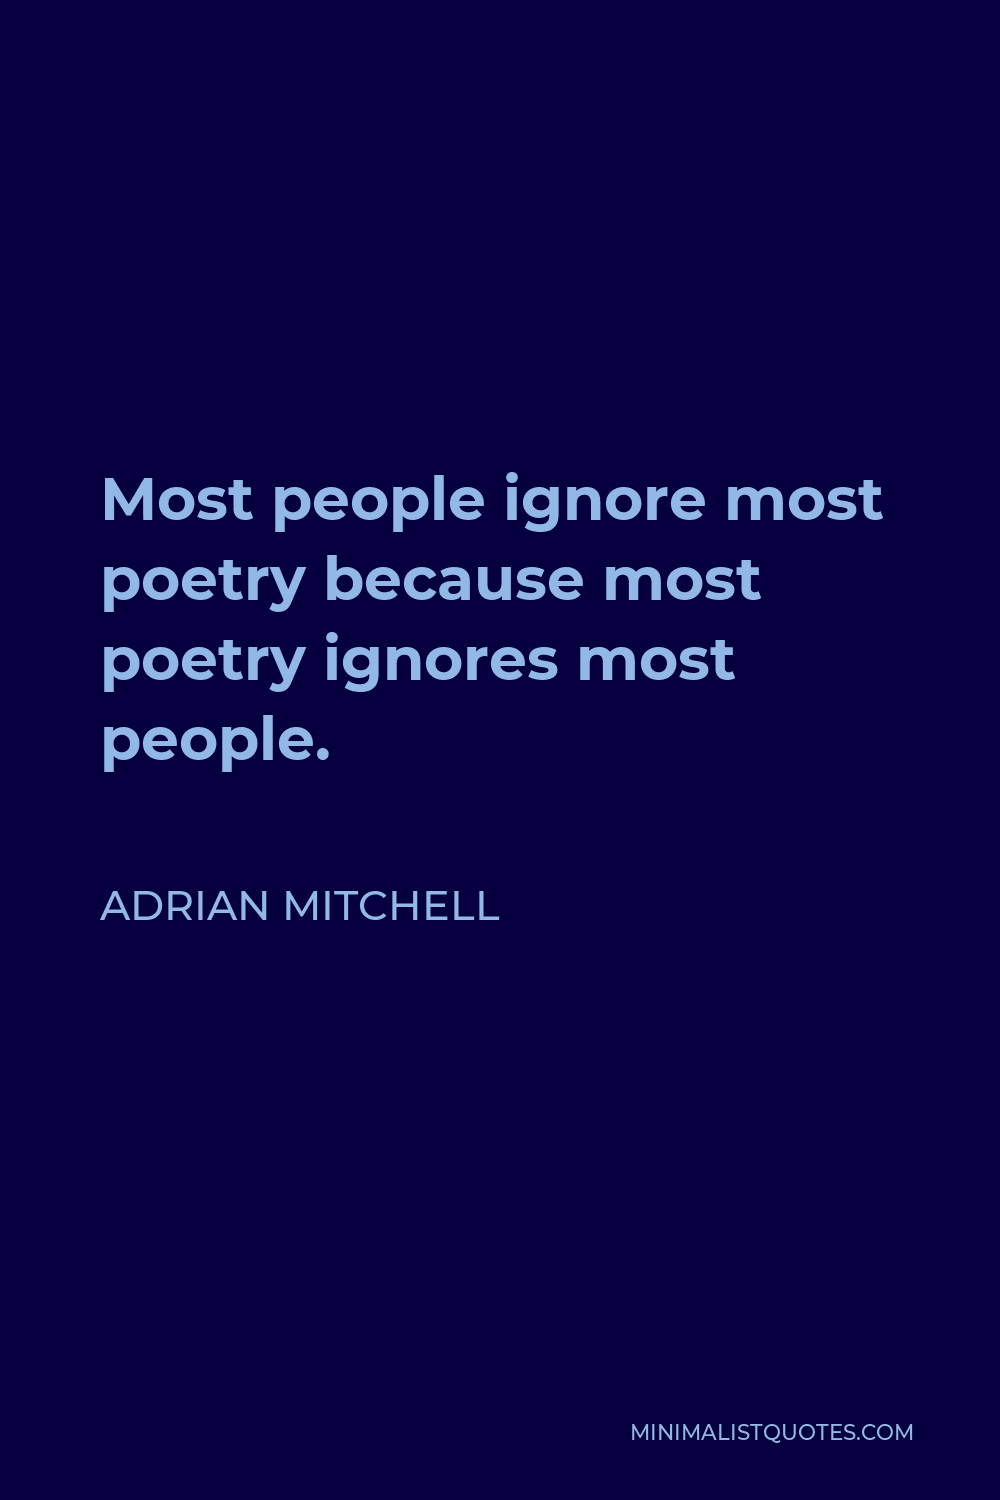 Adrian Mitchell Quote - Most people ignore most poetry because most poetry ignores most people.